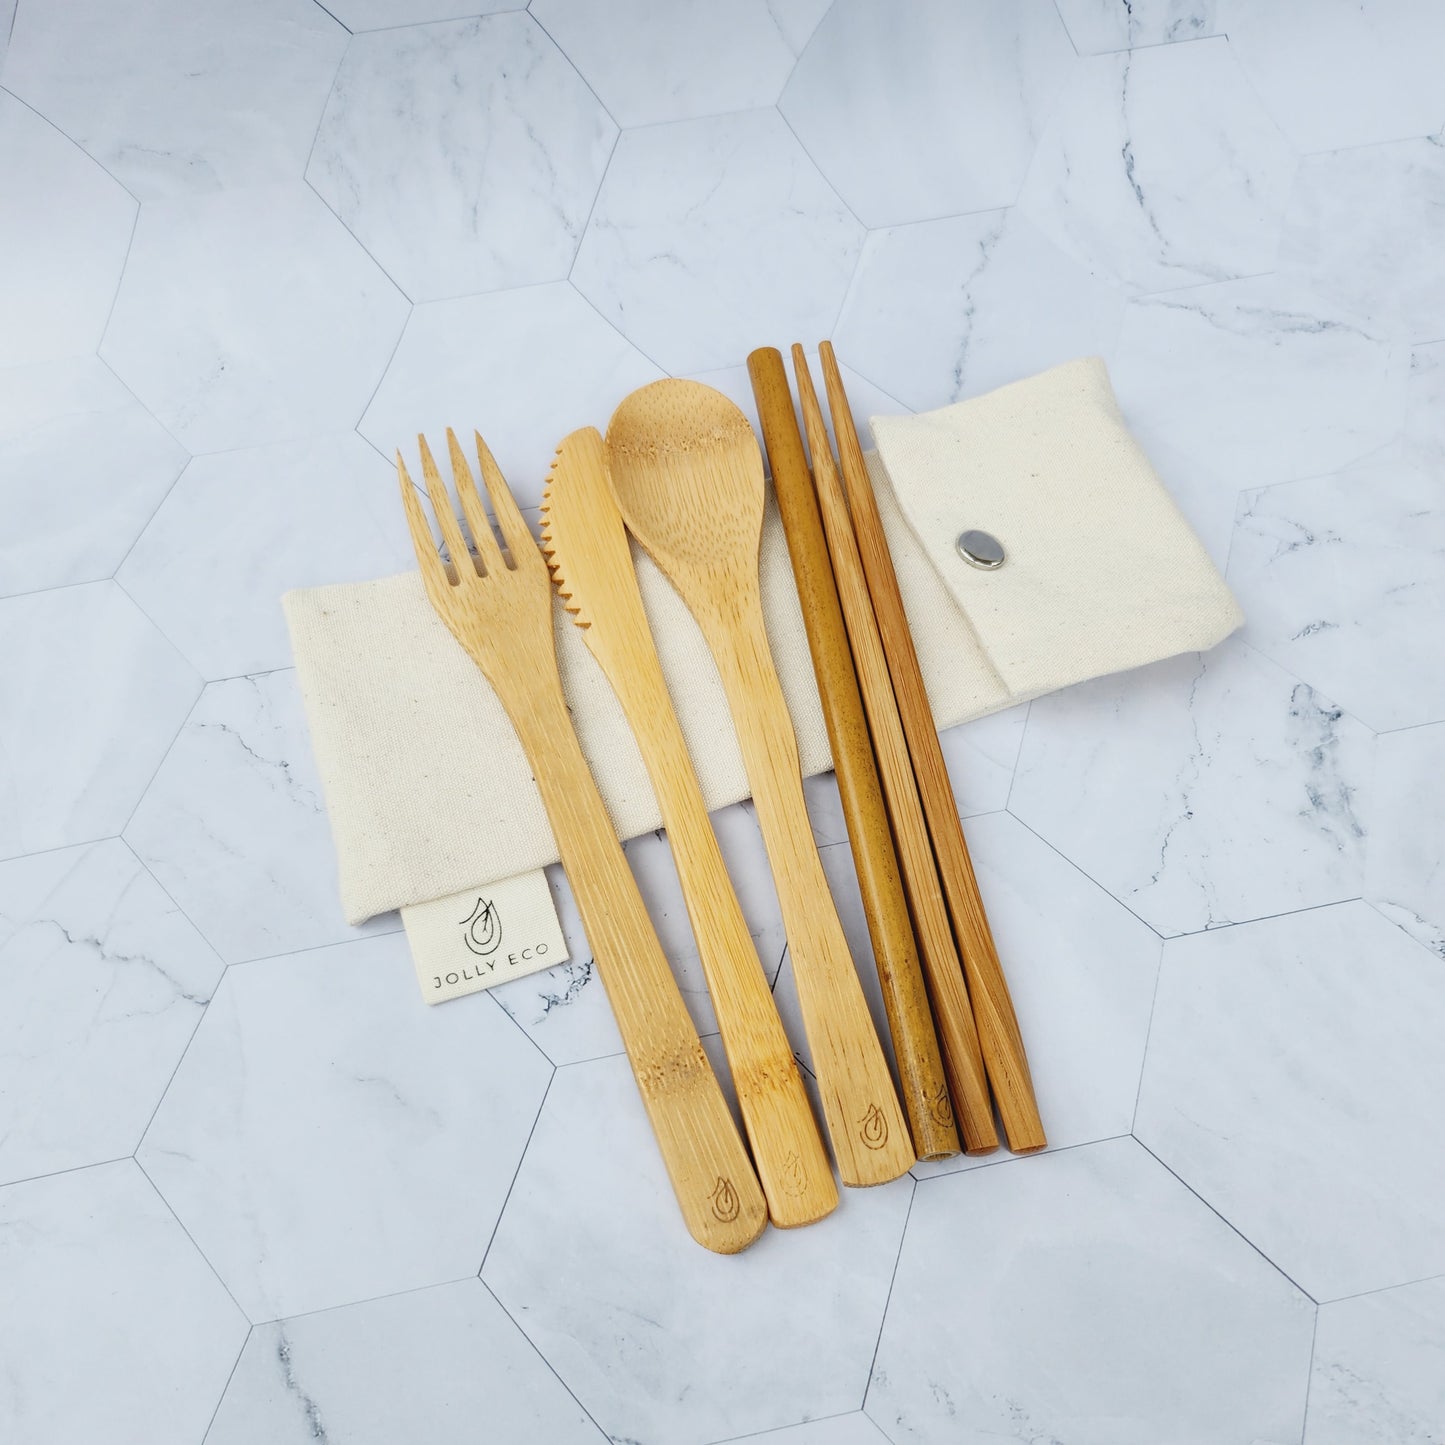 Bamboo Cutlery Set in a Pouch